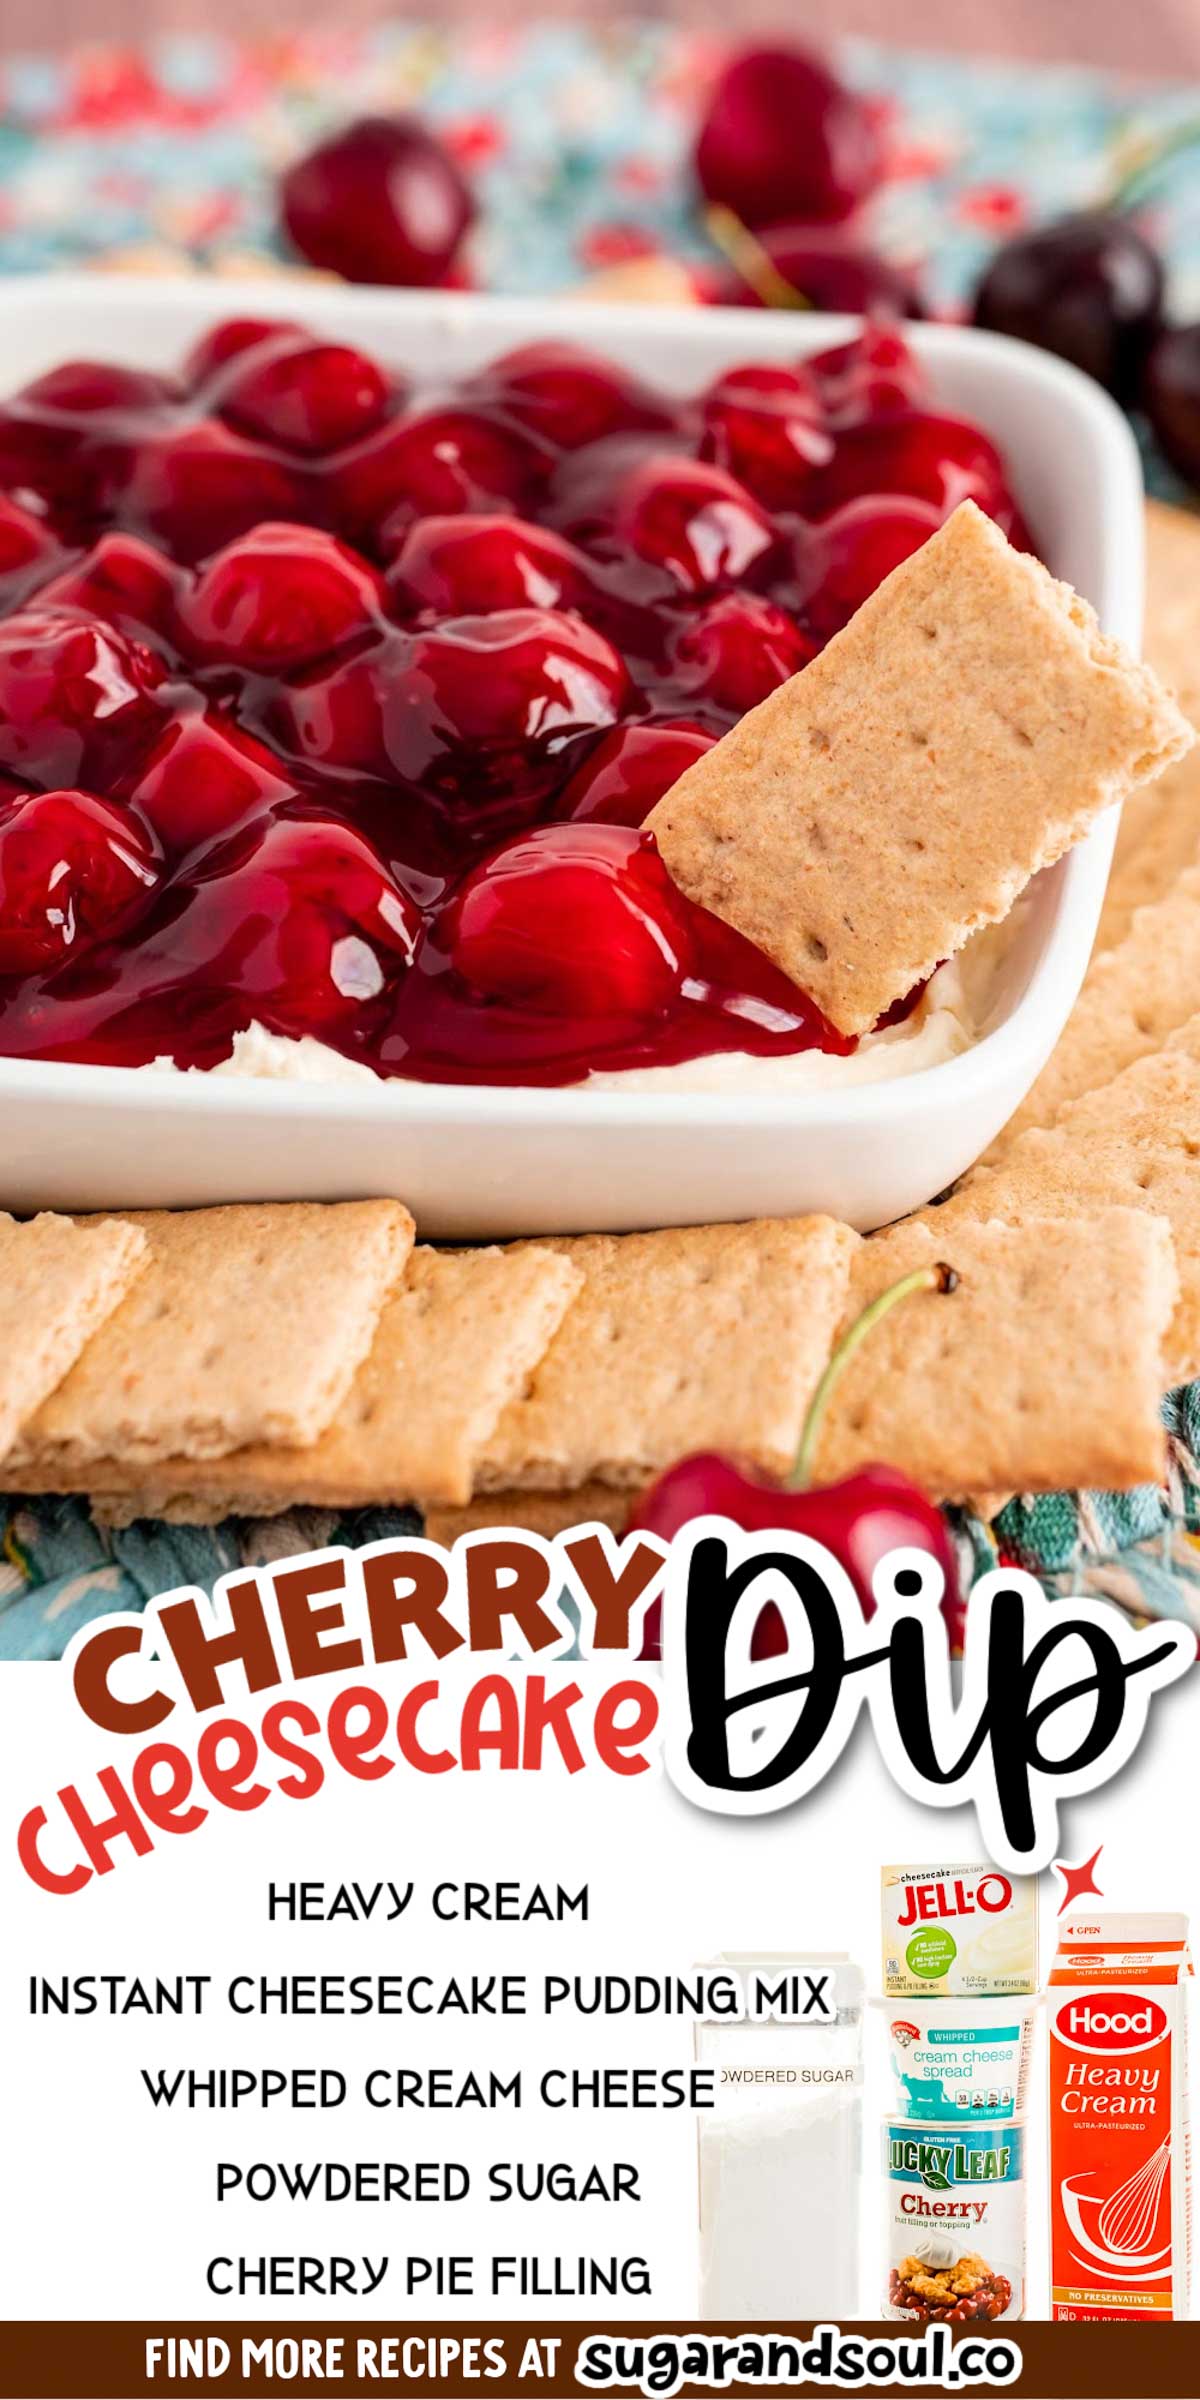 Cherry Cheesecake Dip has a creamy 4 ingredient cheesecake base that's topped with cherry pie filling and then served with graham crackers! Whip this dessert dip up in just 5 minutes to share with friends and family! via @sugarandsoulco